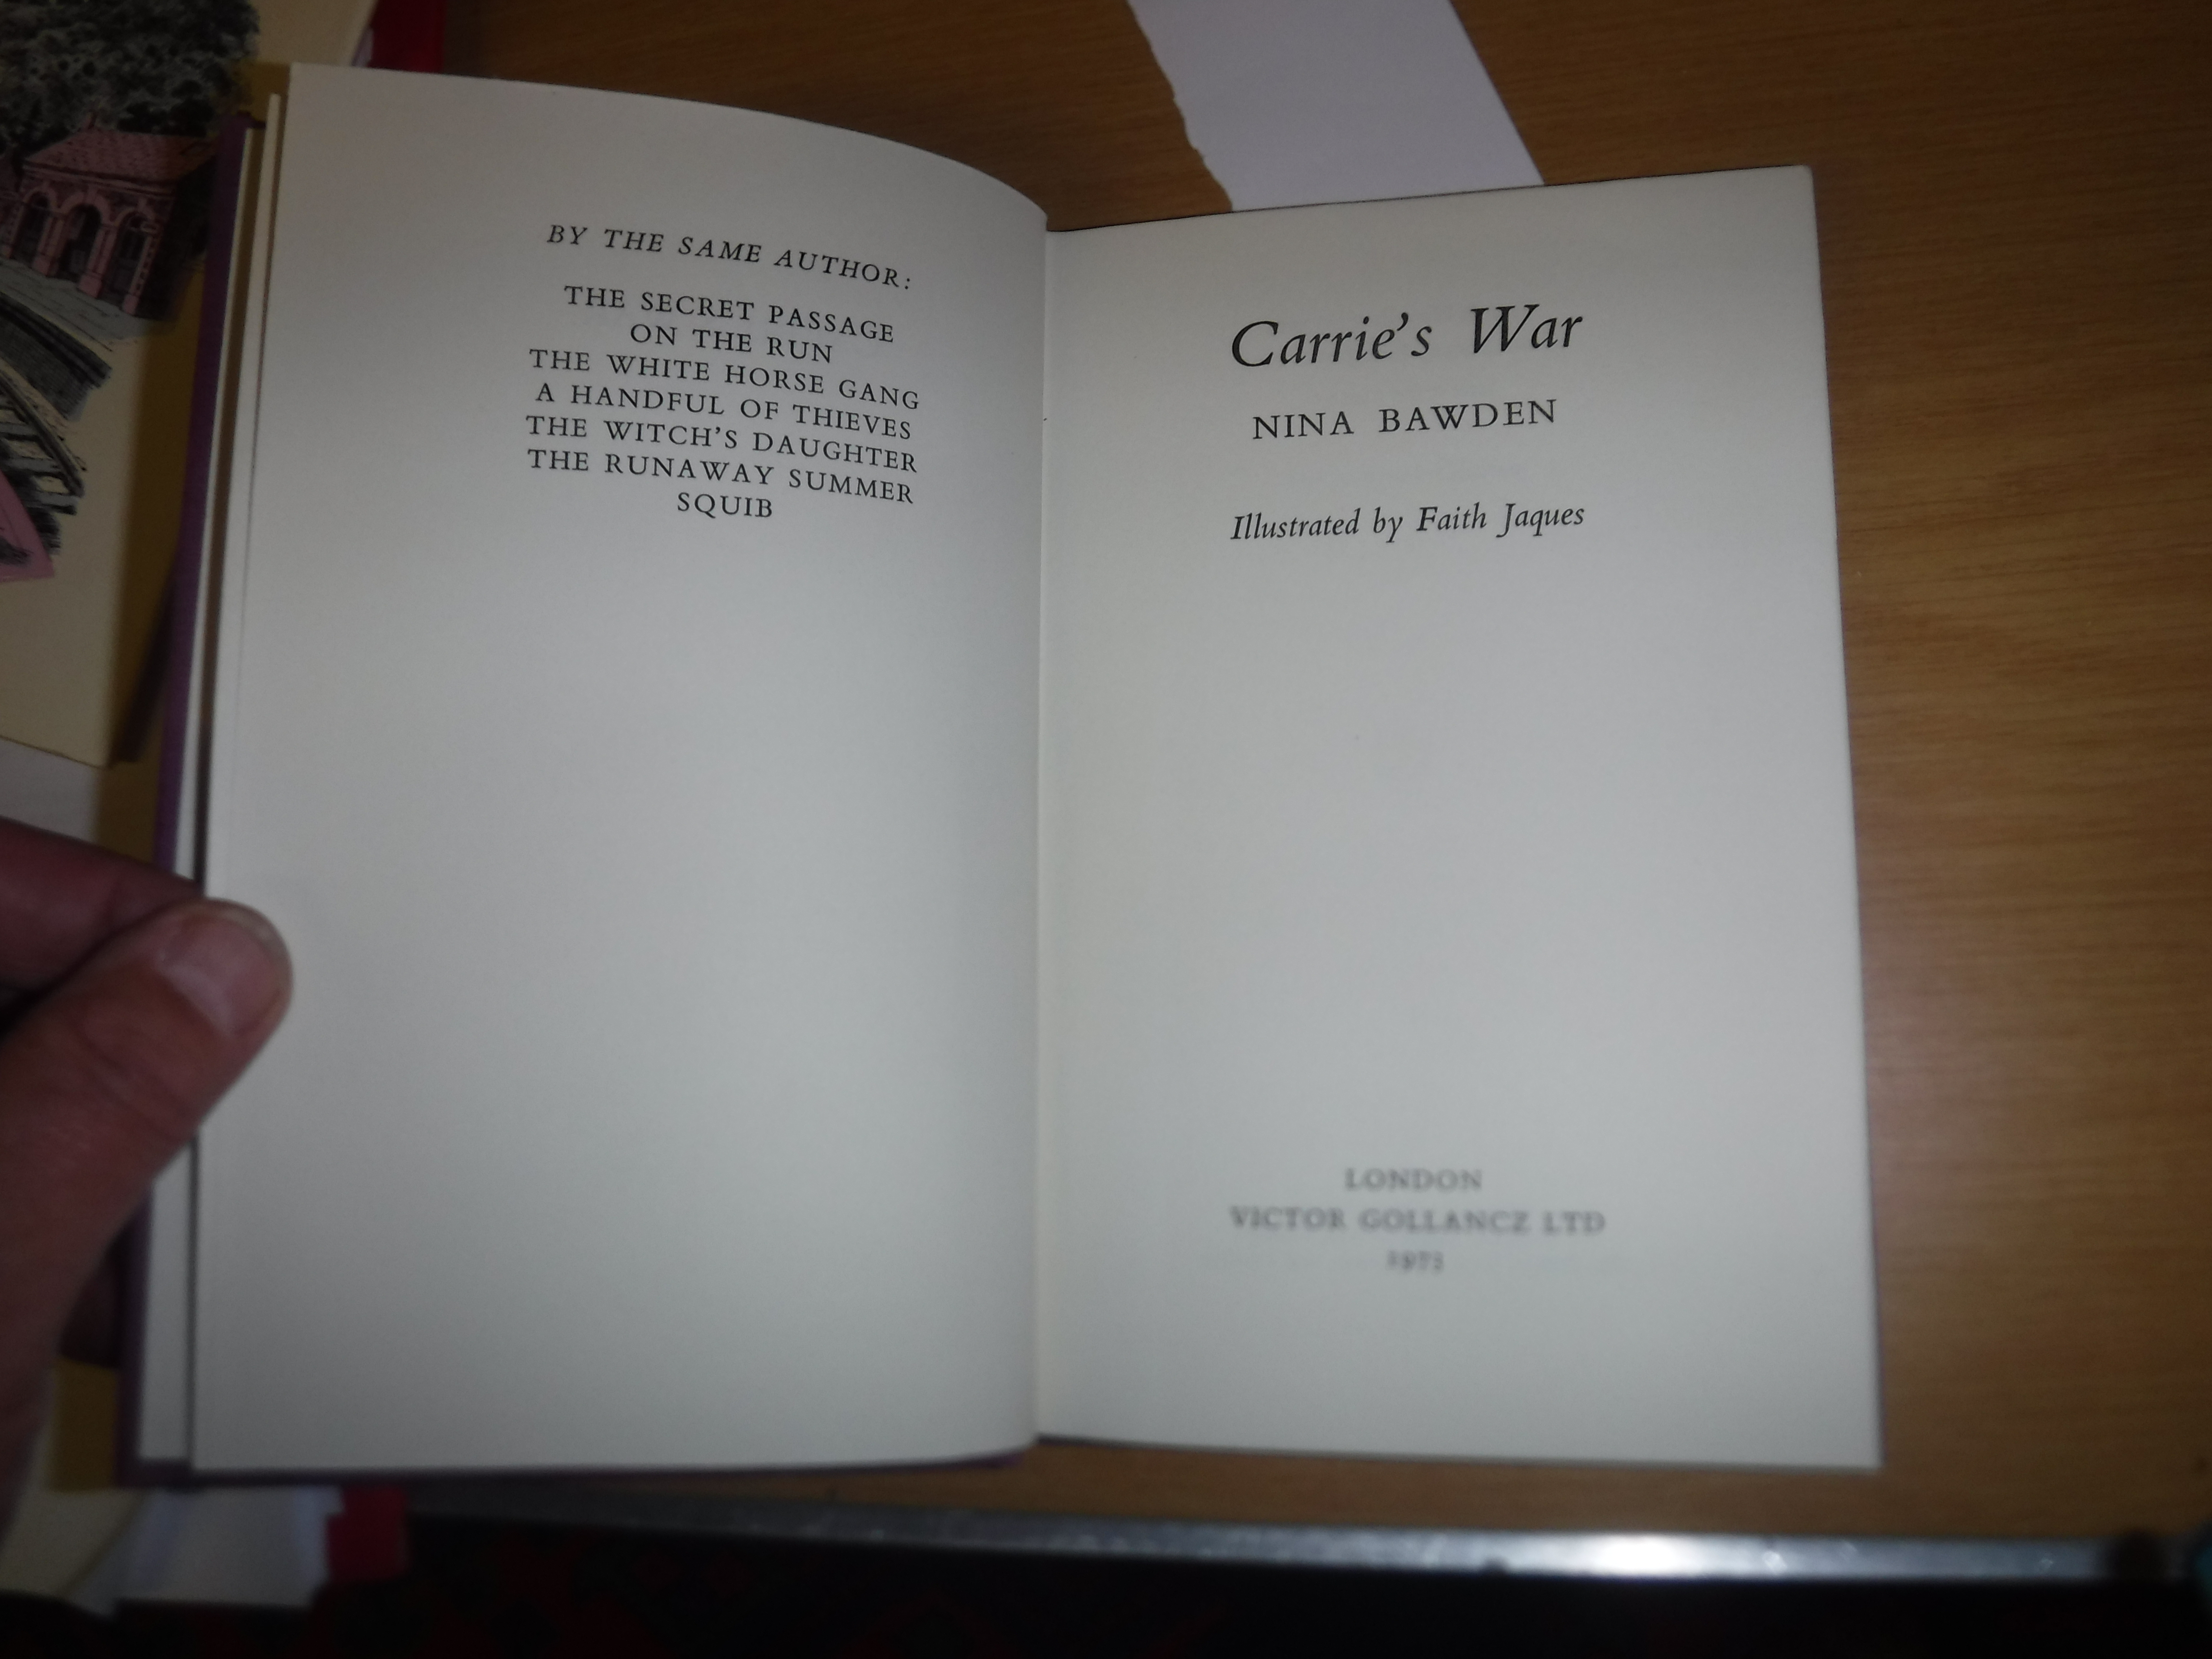 NINA BAWDEN "Carrie's War" illustrated by Faith Jaques, first edition 1973, signed by the author, - Image 9 of 12